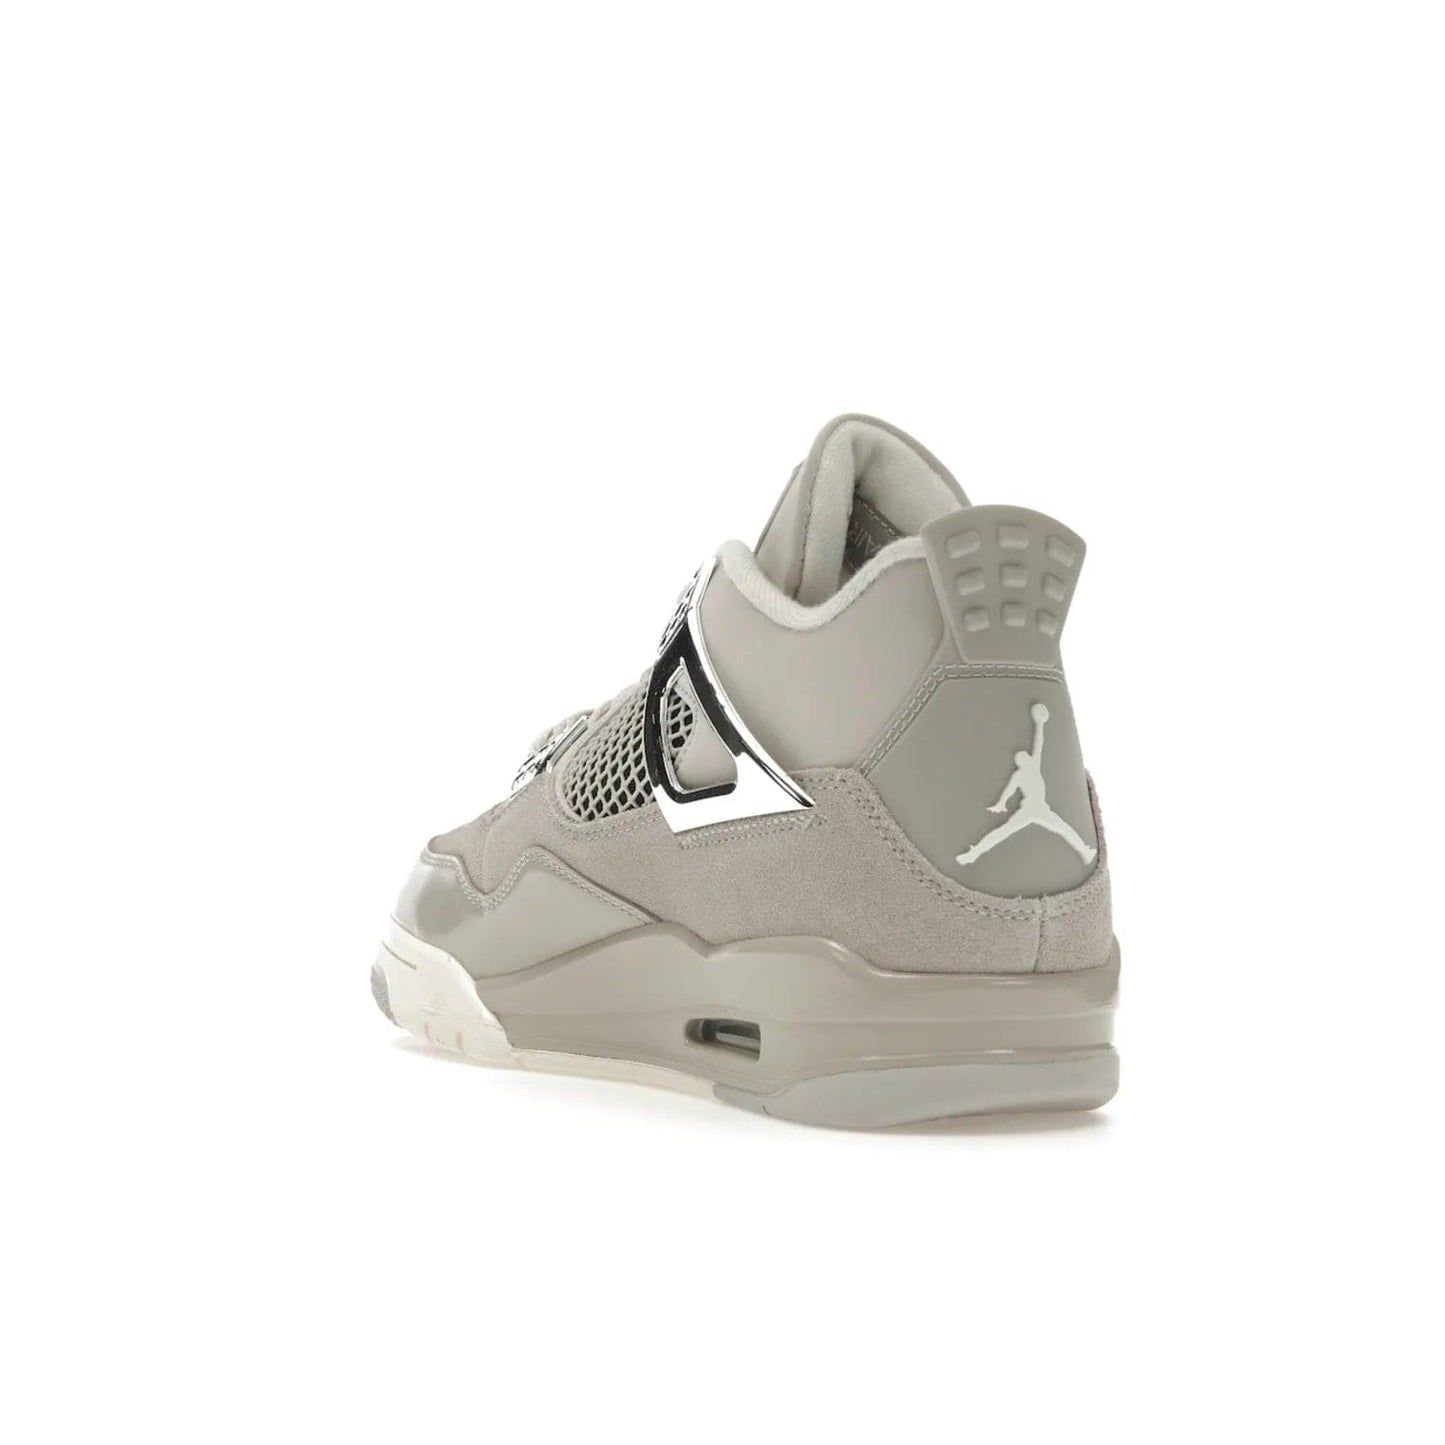 Jordan 4 Retro Frozen Moments (Women's) - Image 25 - Only at www.BallersClubKickz.com - The Jordan 4 Retro Frozen Moments is a stylish blend of classic design elements and modern tones. Featuring suede and leather overlays in a light iron-ore, sail, neutral grey, black, and metallic silver colorway. Get this iconic high-performance sneaker for $210.